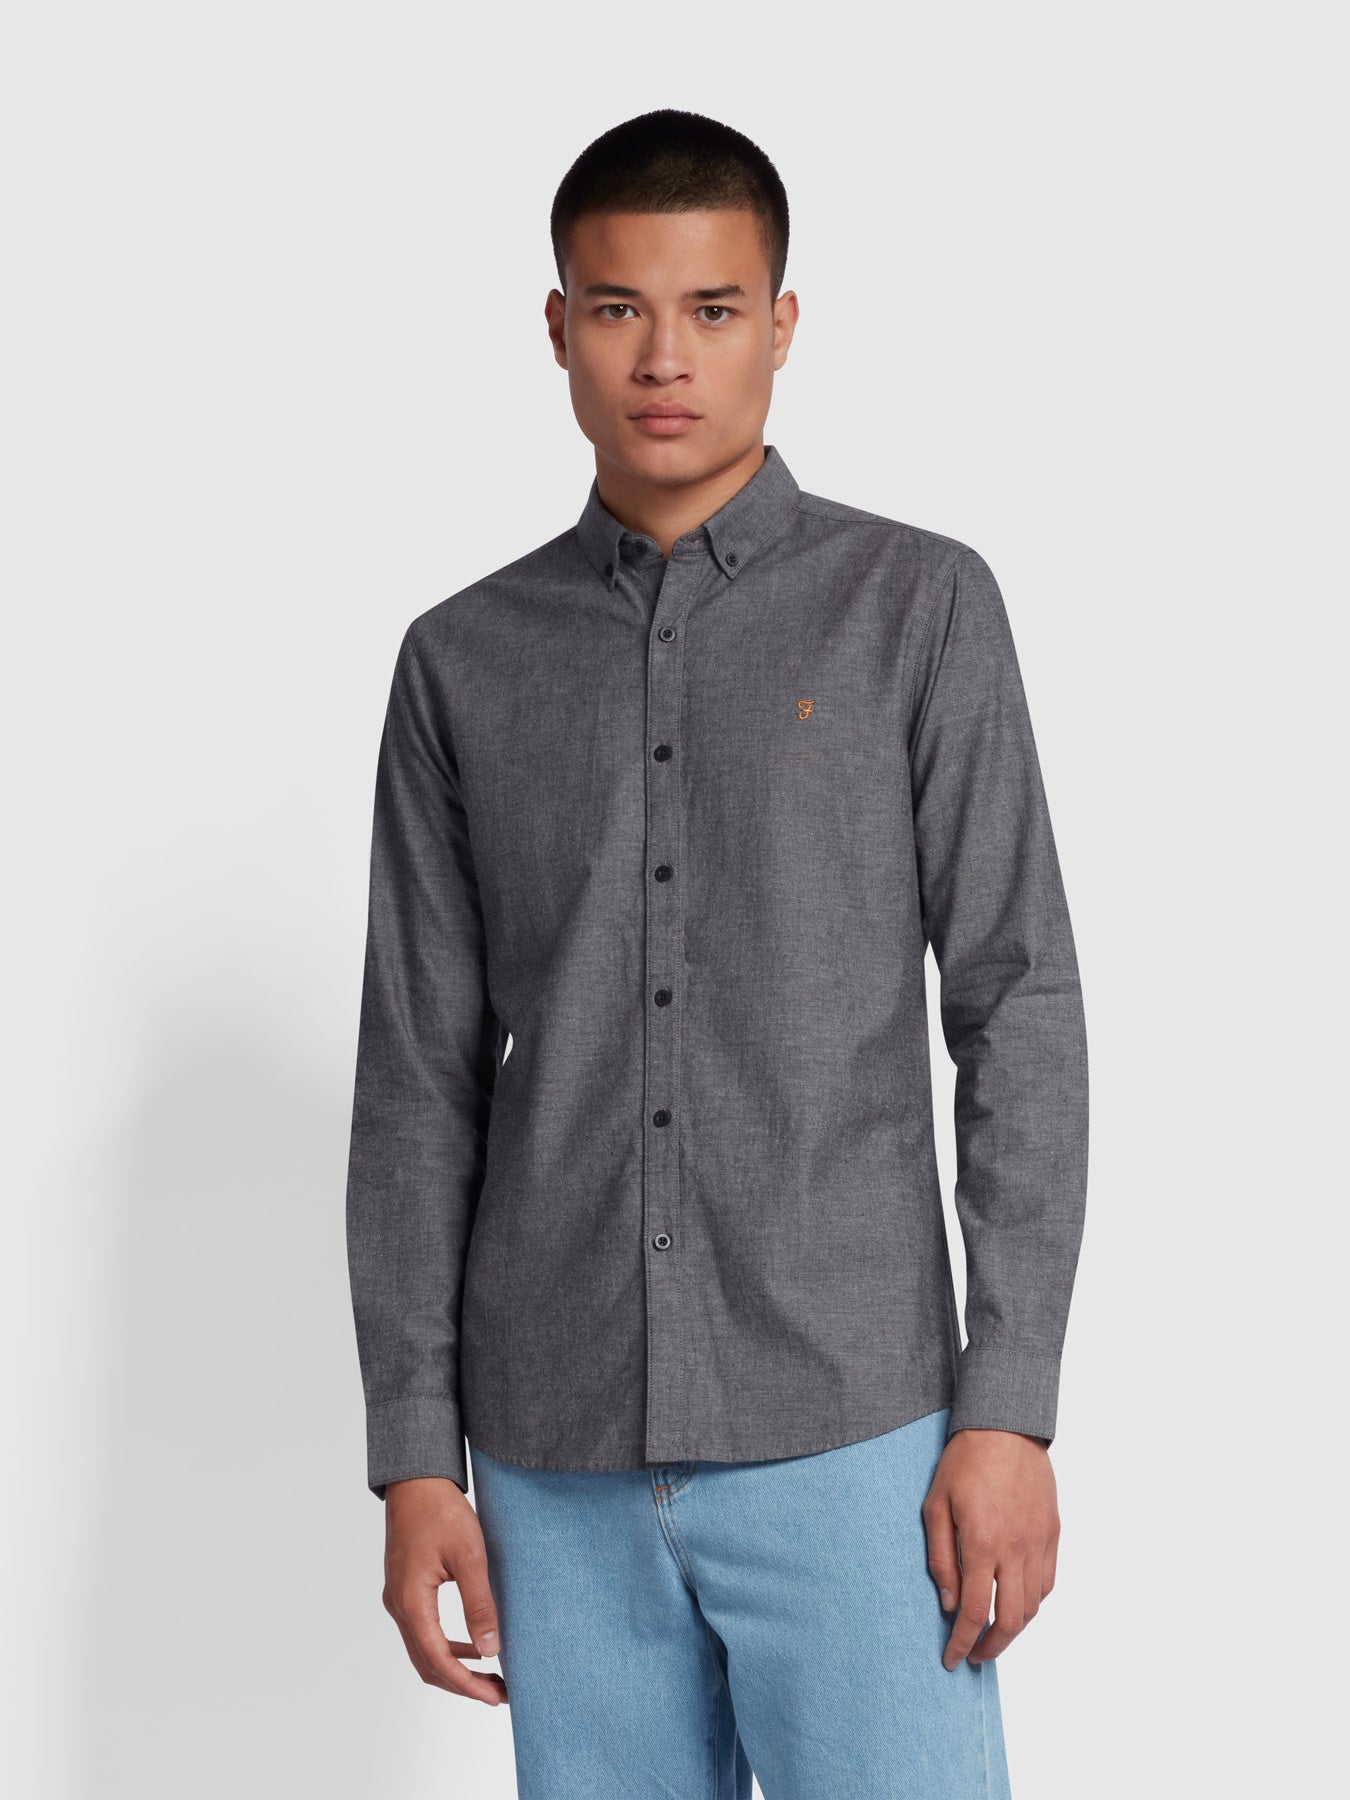 View Steen Slim Fit Brushed Organic Cotton Shirt In Gravel Marl information